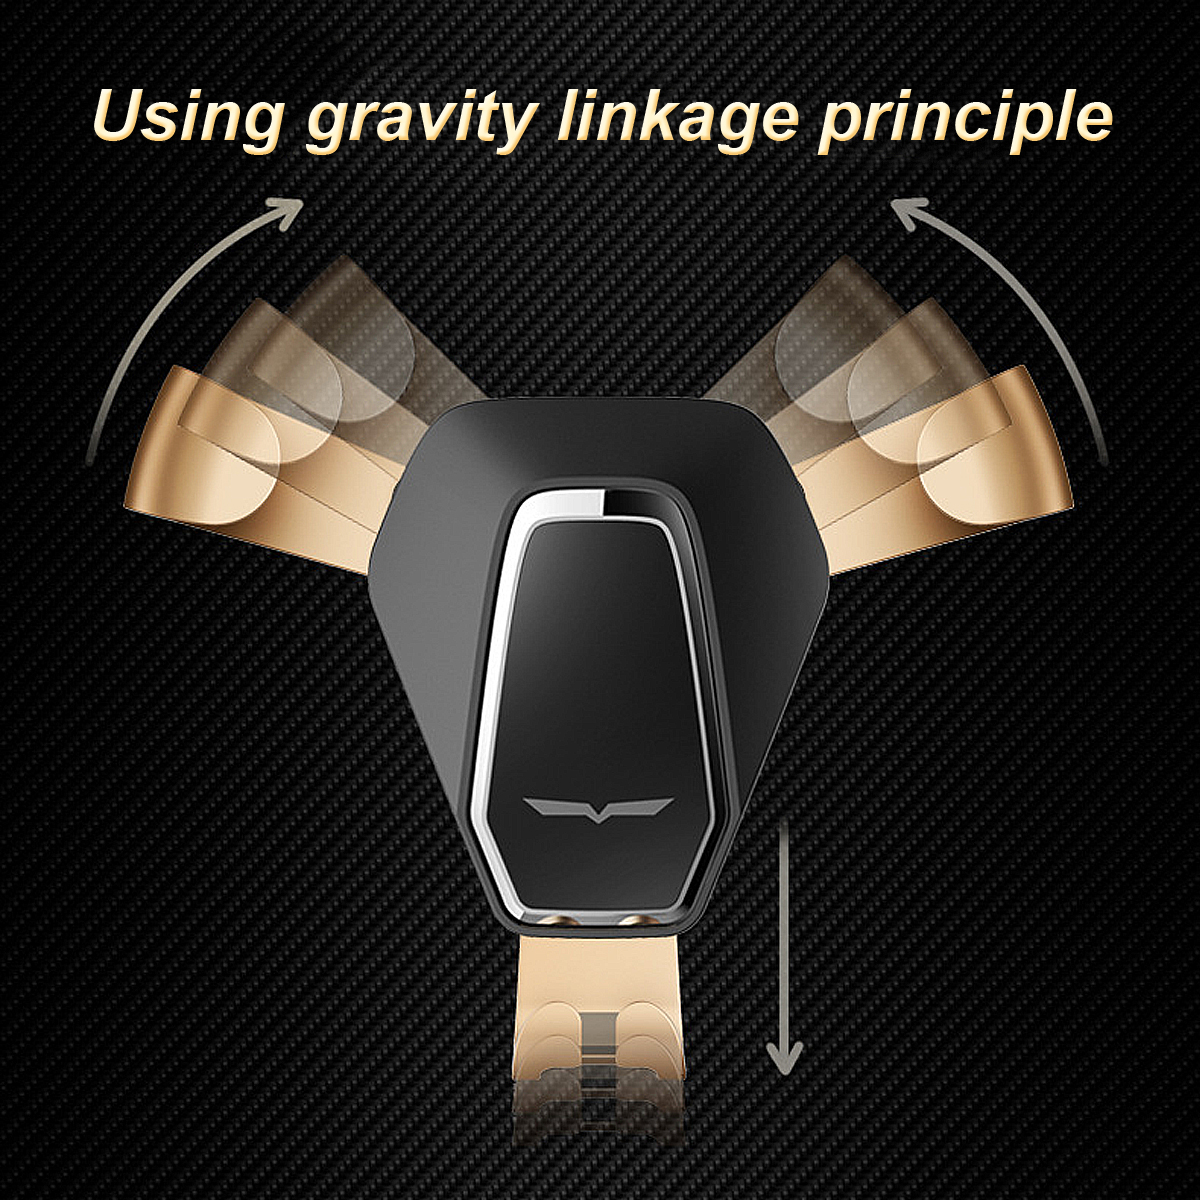 360-Degree-Rotation-Metal-Gravity-Auto-Lock-Holder-Car-Air-Vent-Mount-Phone-Stand-Outlet-Bracket-1238698